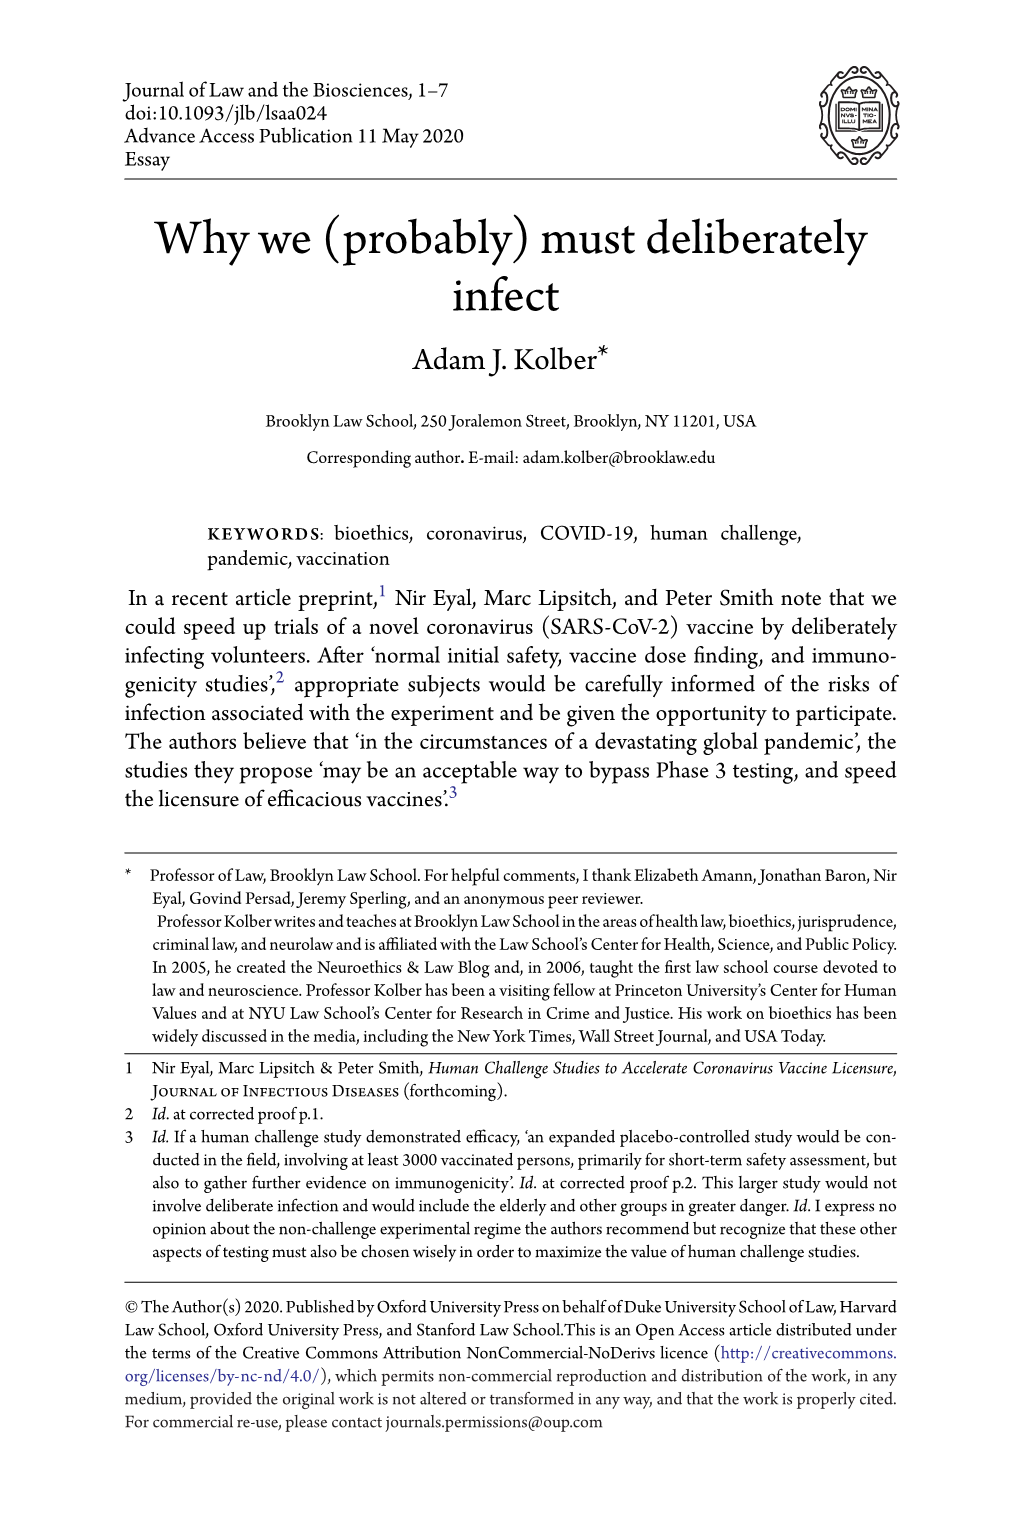 Why We (Probably) Must Deliberately Infect I Argue That the Authors Could Make a Far Stronger Claim